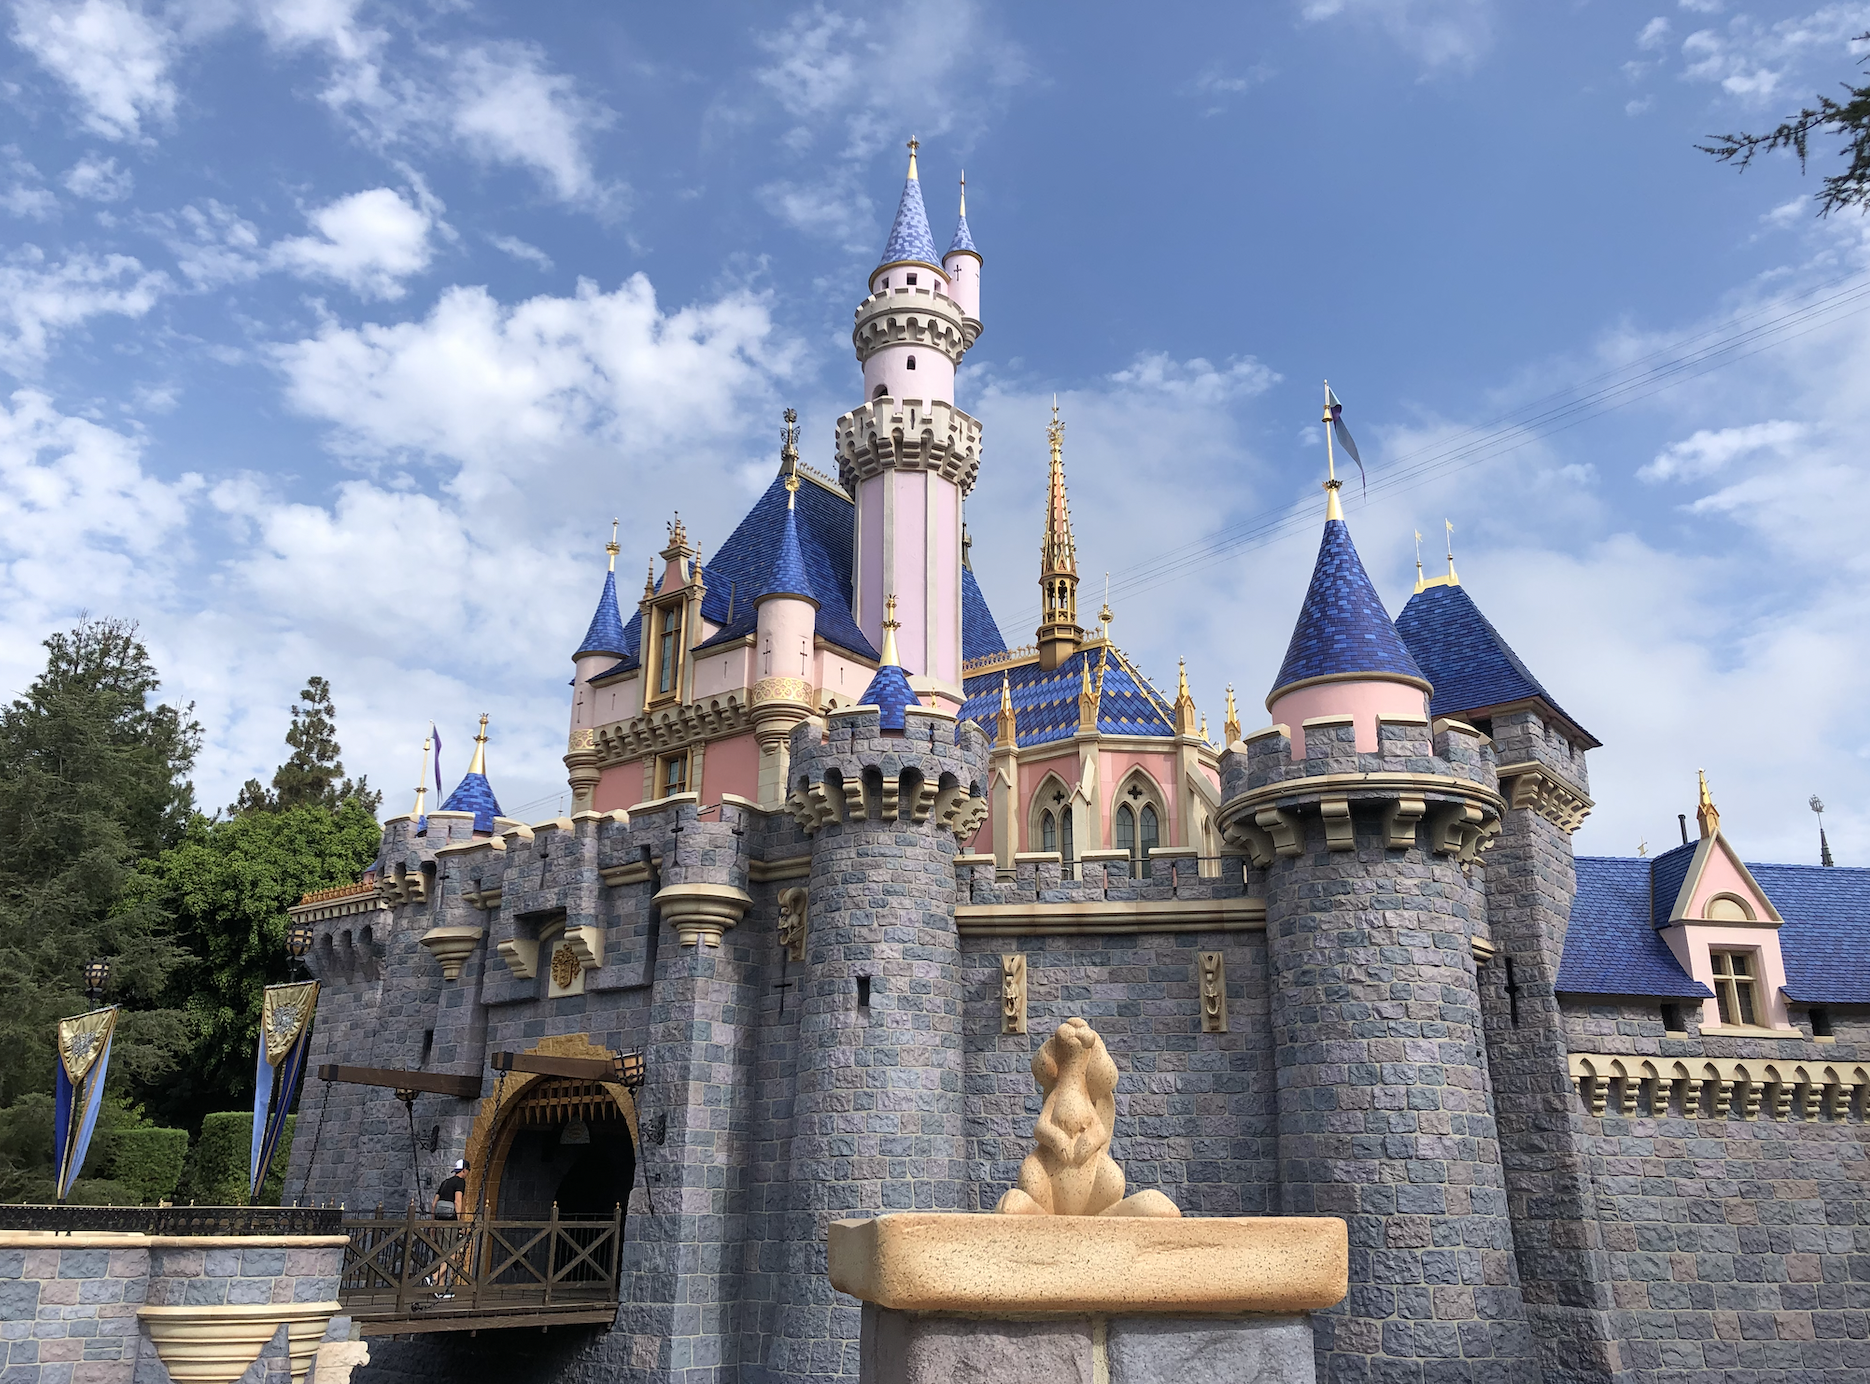 How To Have A Disney Day WITHOUT Visiting Disneyland